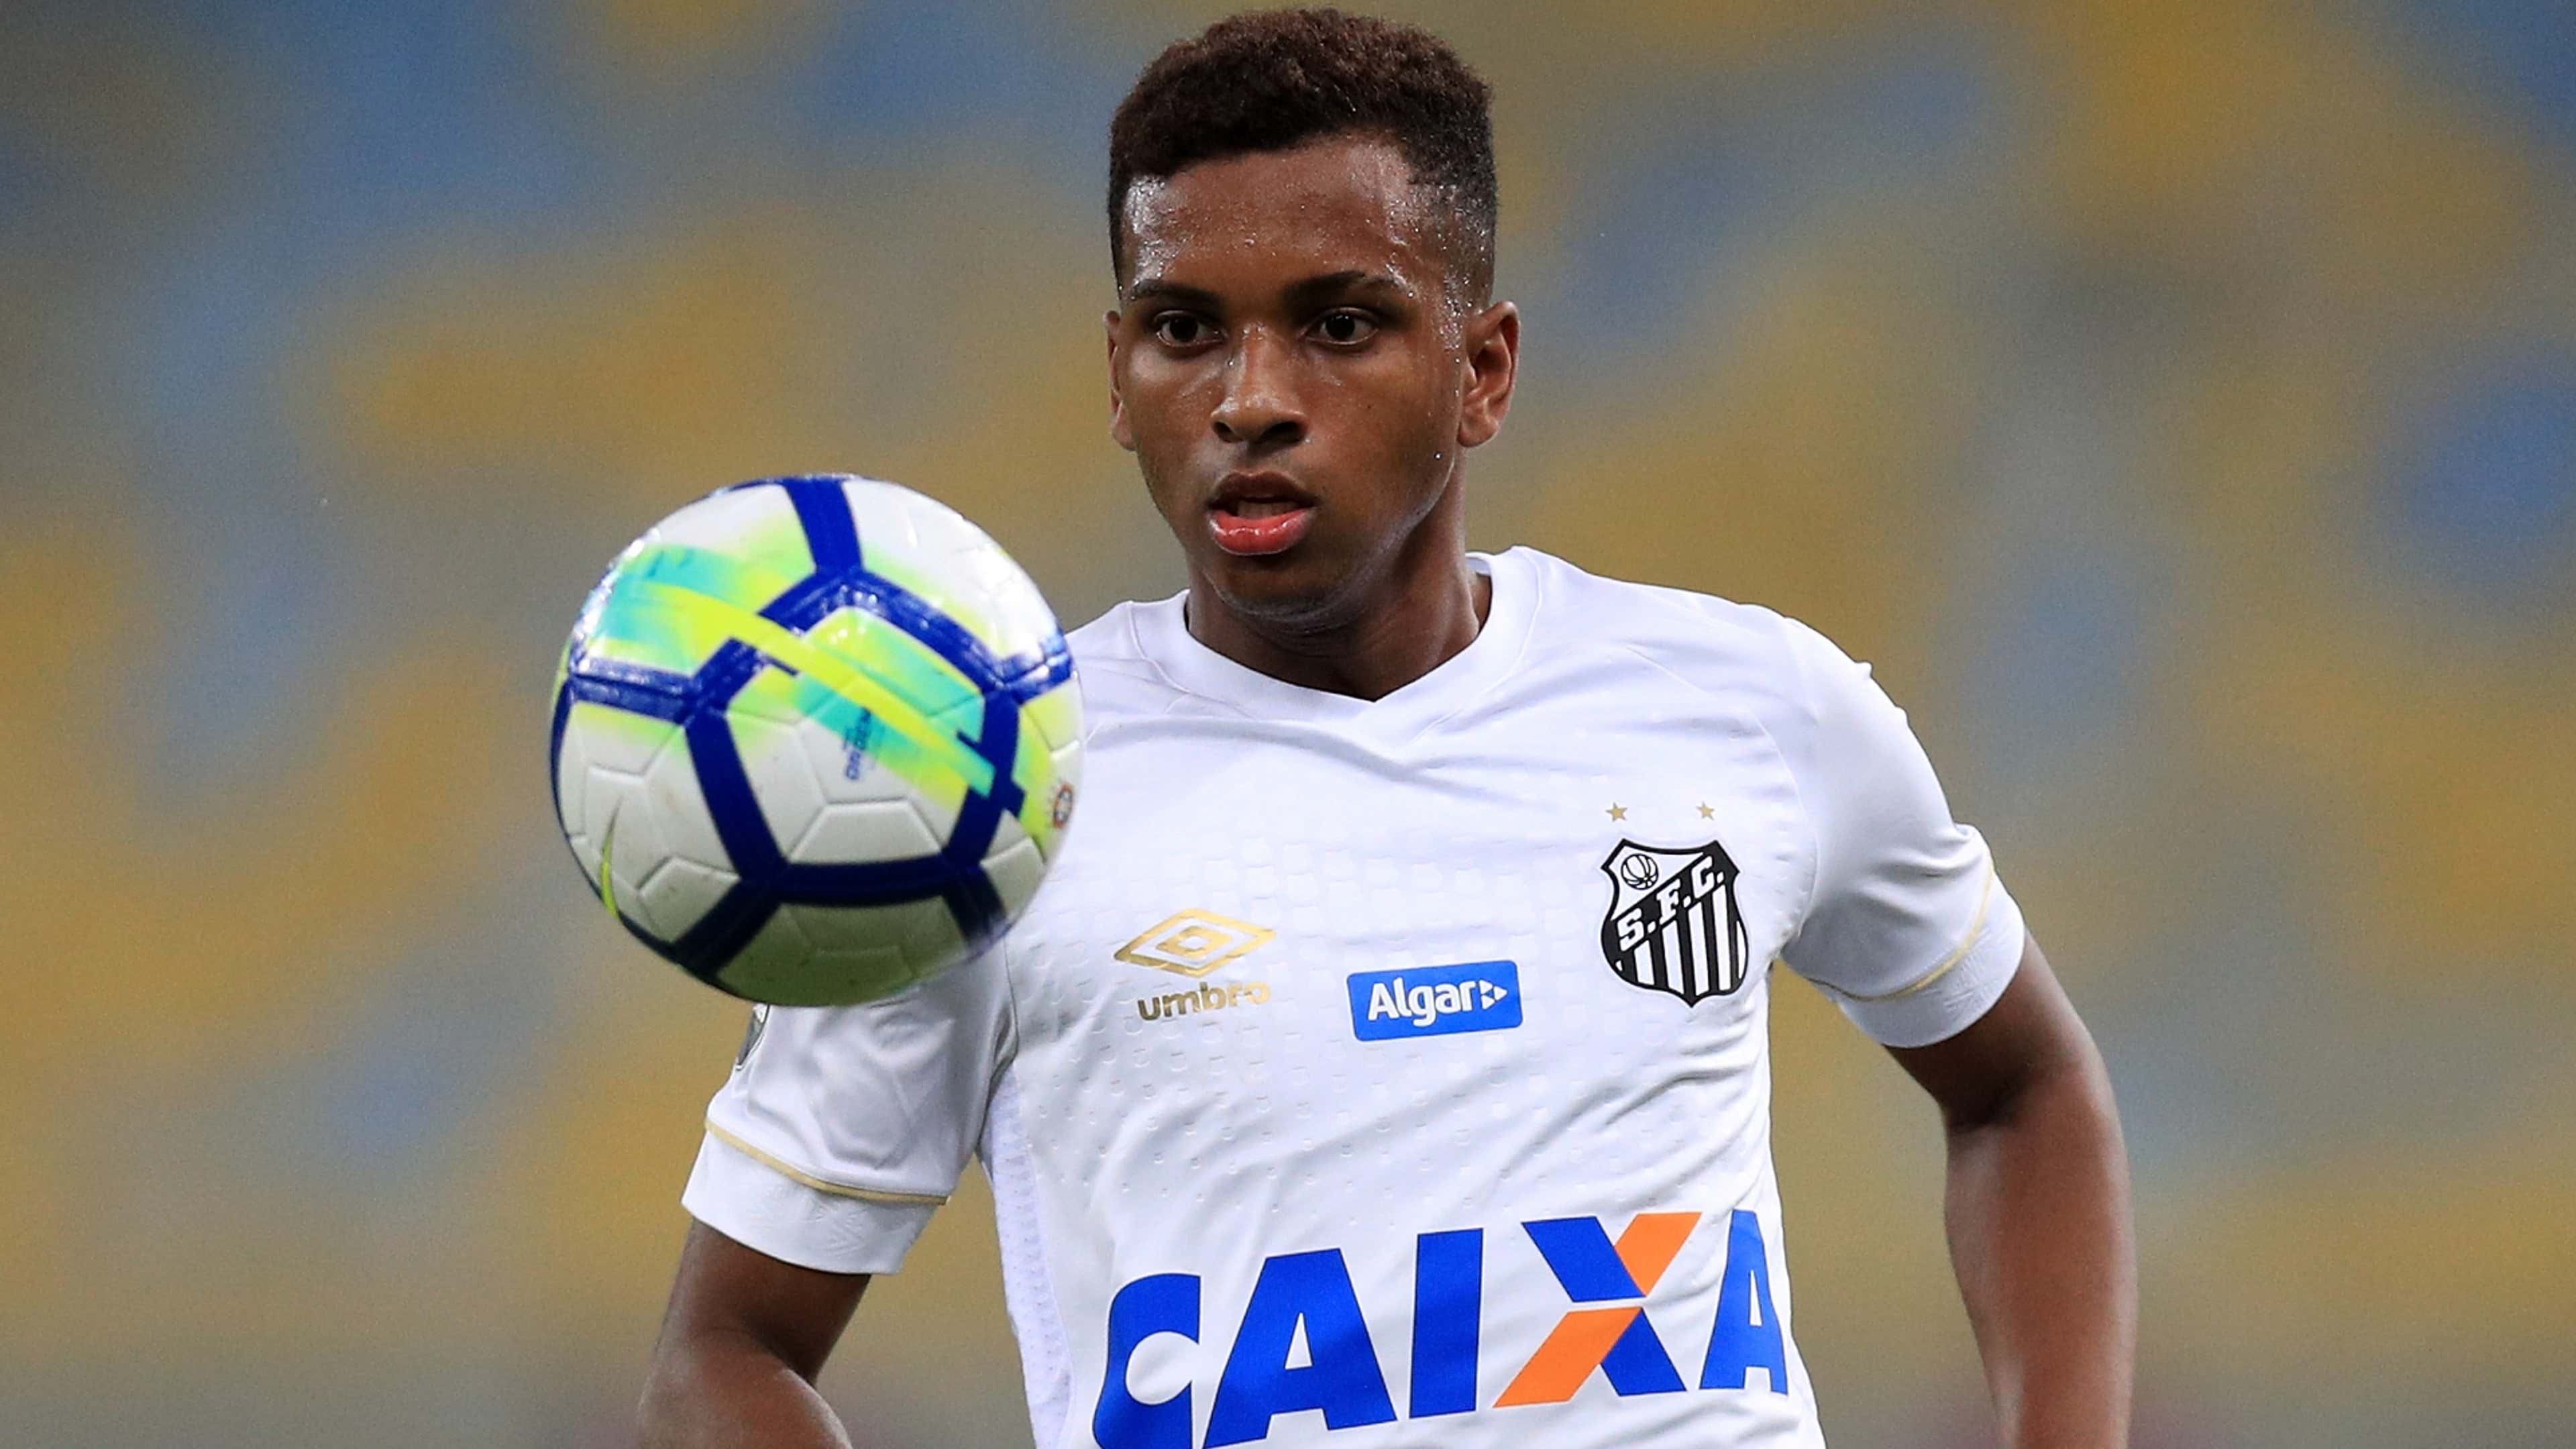 The Real deal - Madrid-bound Rodrygo is the NxGn ready for the big